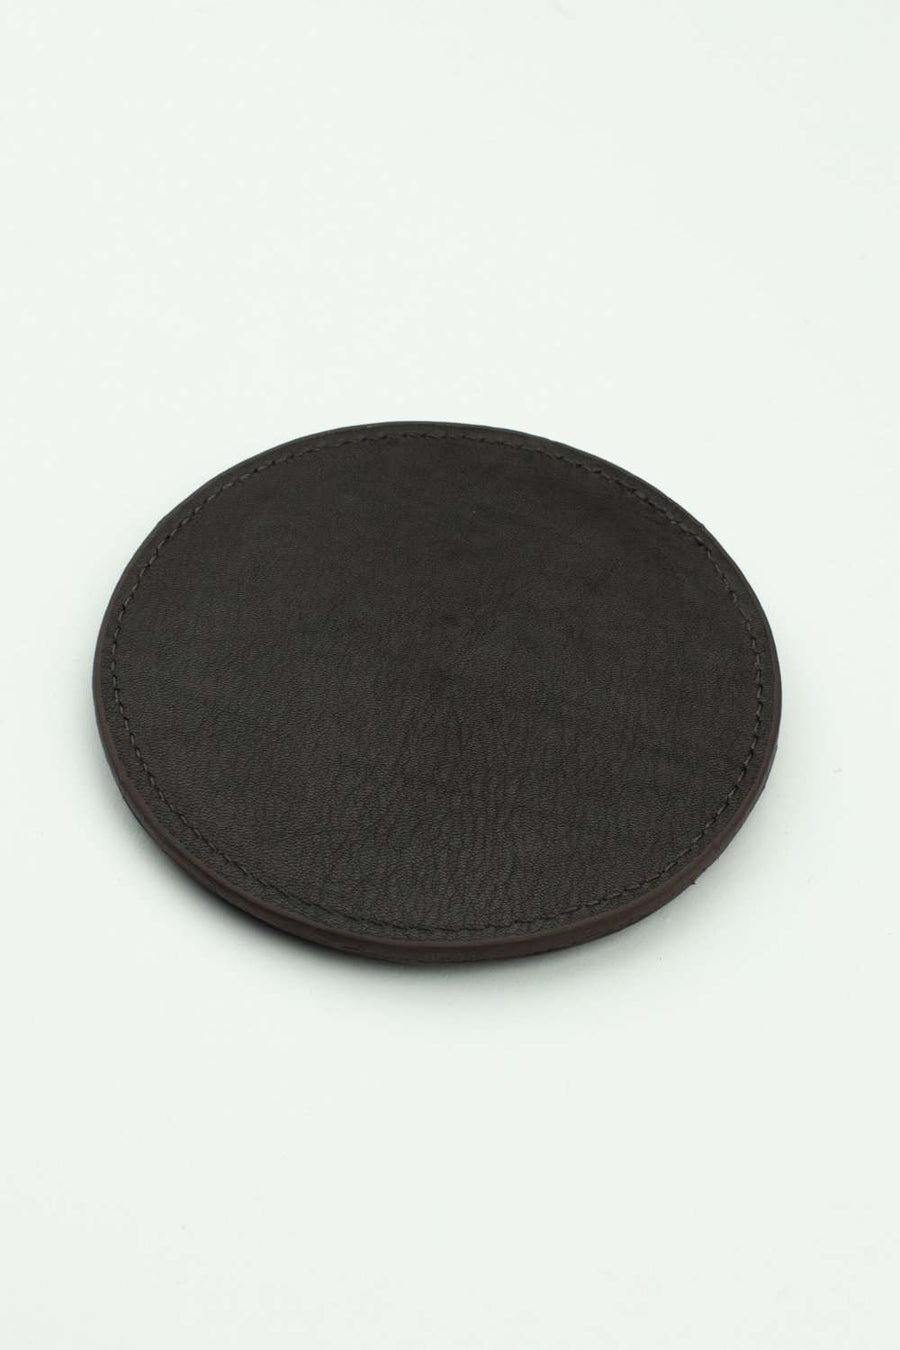 Natural Cowhide Coaster Assorted Tones Set of 8 pcs Drink Coasters Round  Leather 4.5